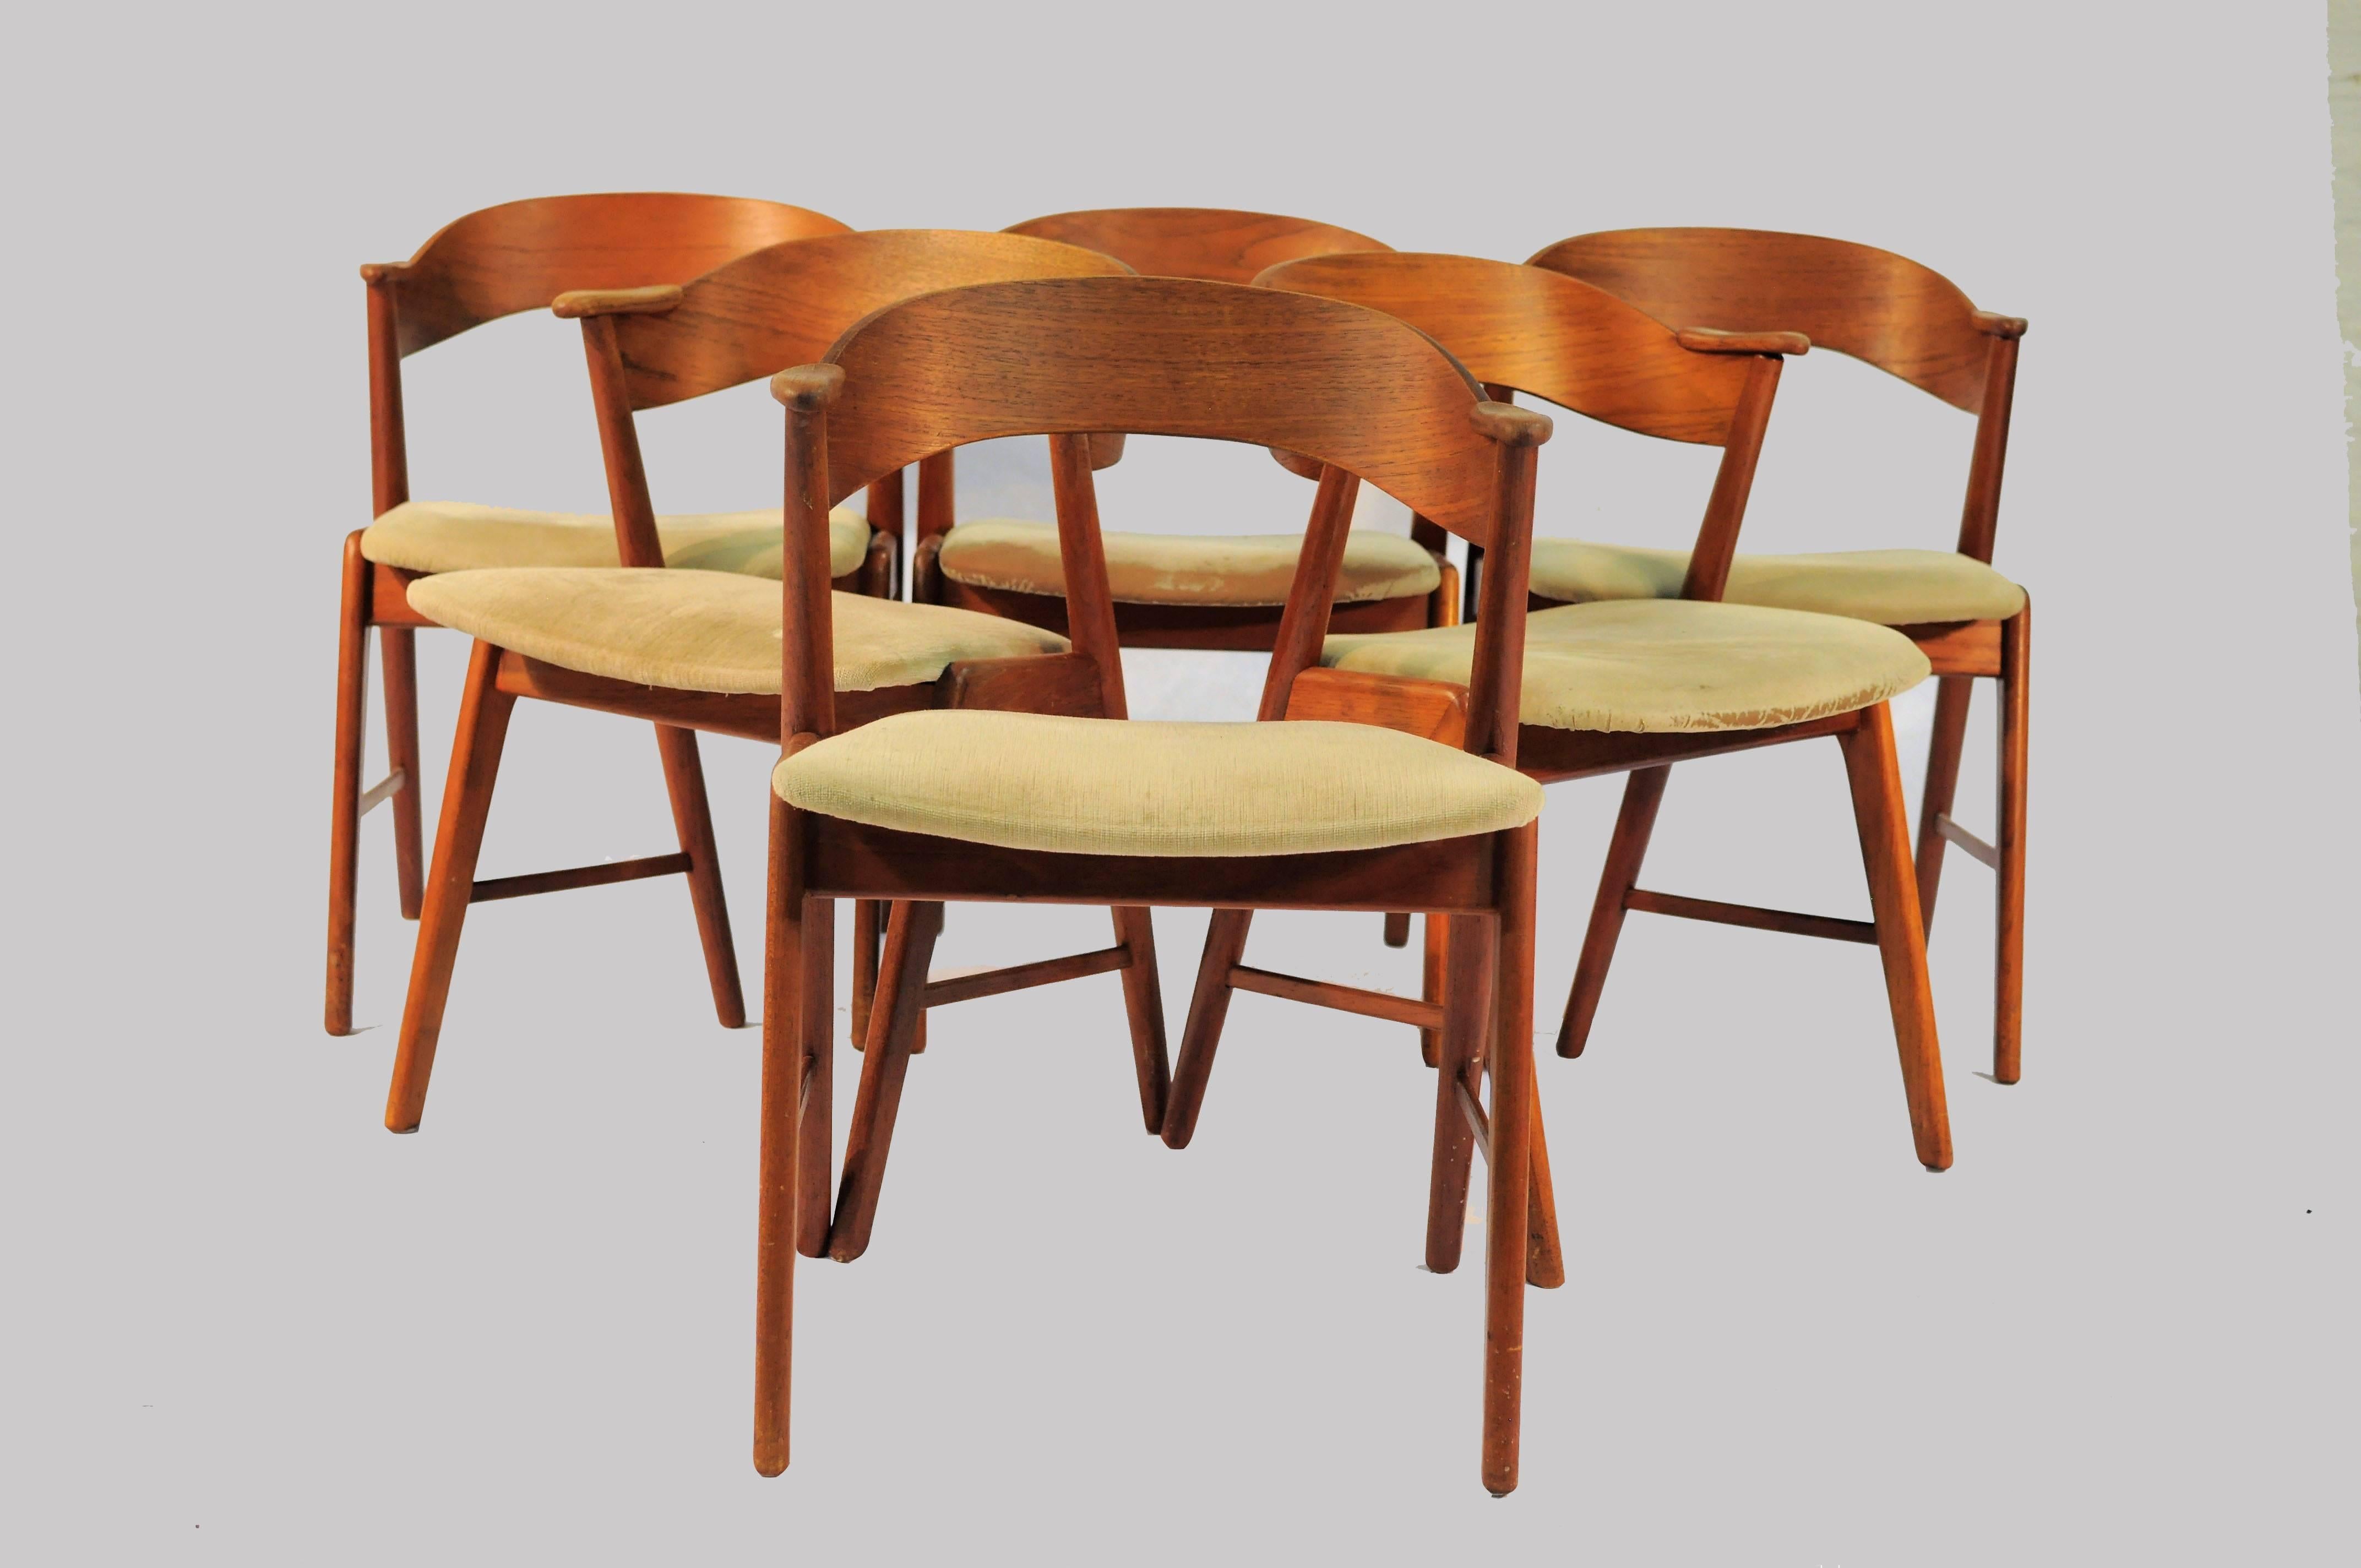 Set of Six dining chairs in teak with curved backrests and elegant frames. The chairs are commonly known as model 32 and by many attributed to Kai Kristiansen.

The chairs are well crafted and feature refinished frames and old upholstery.

As for